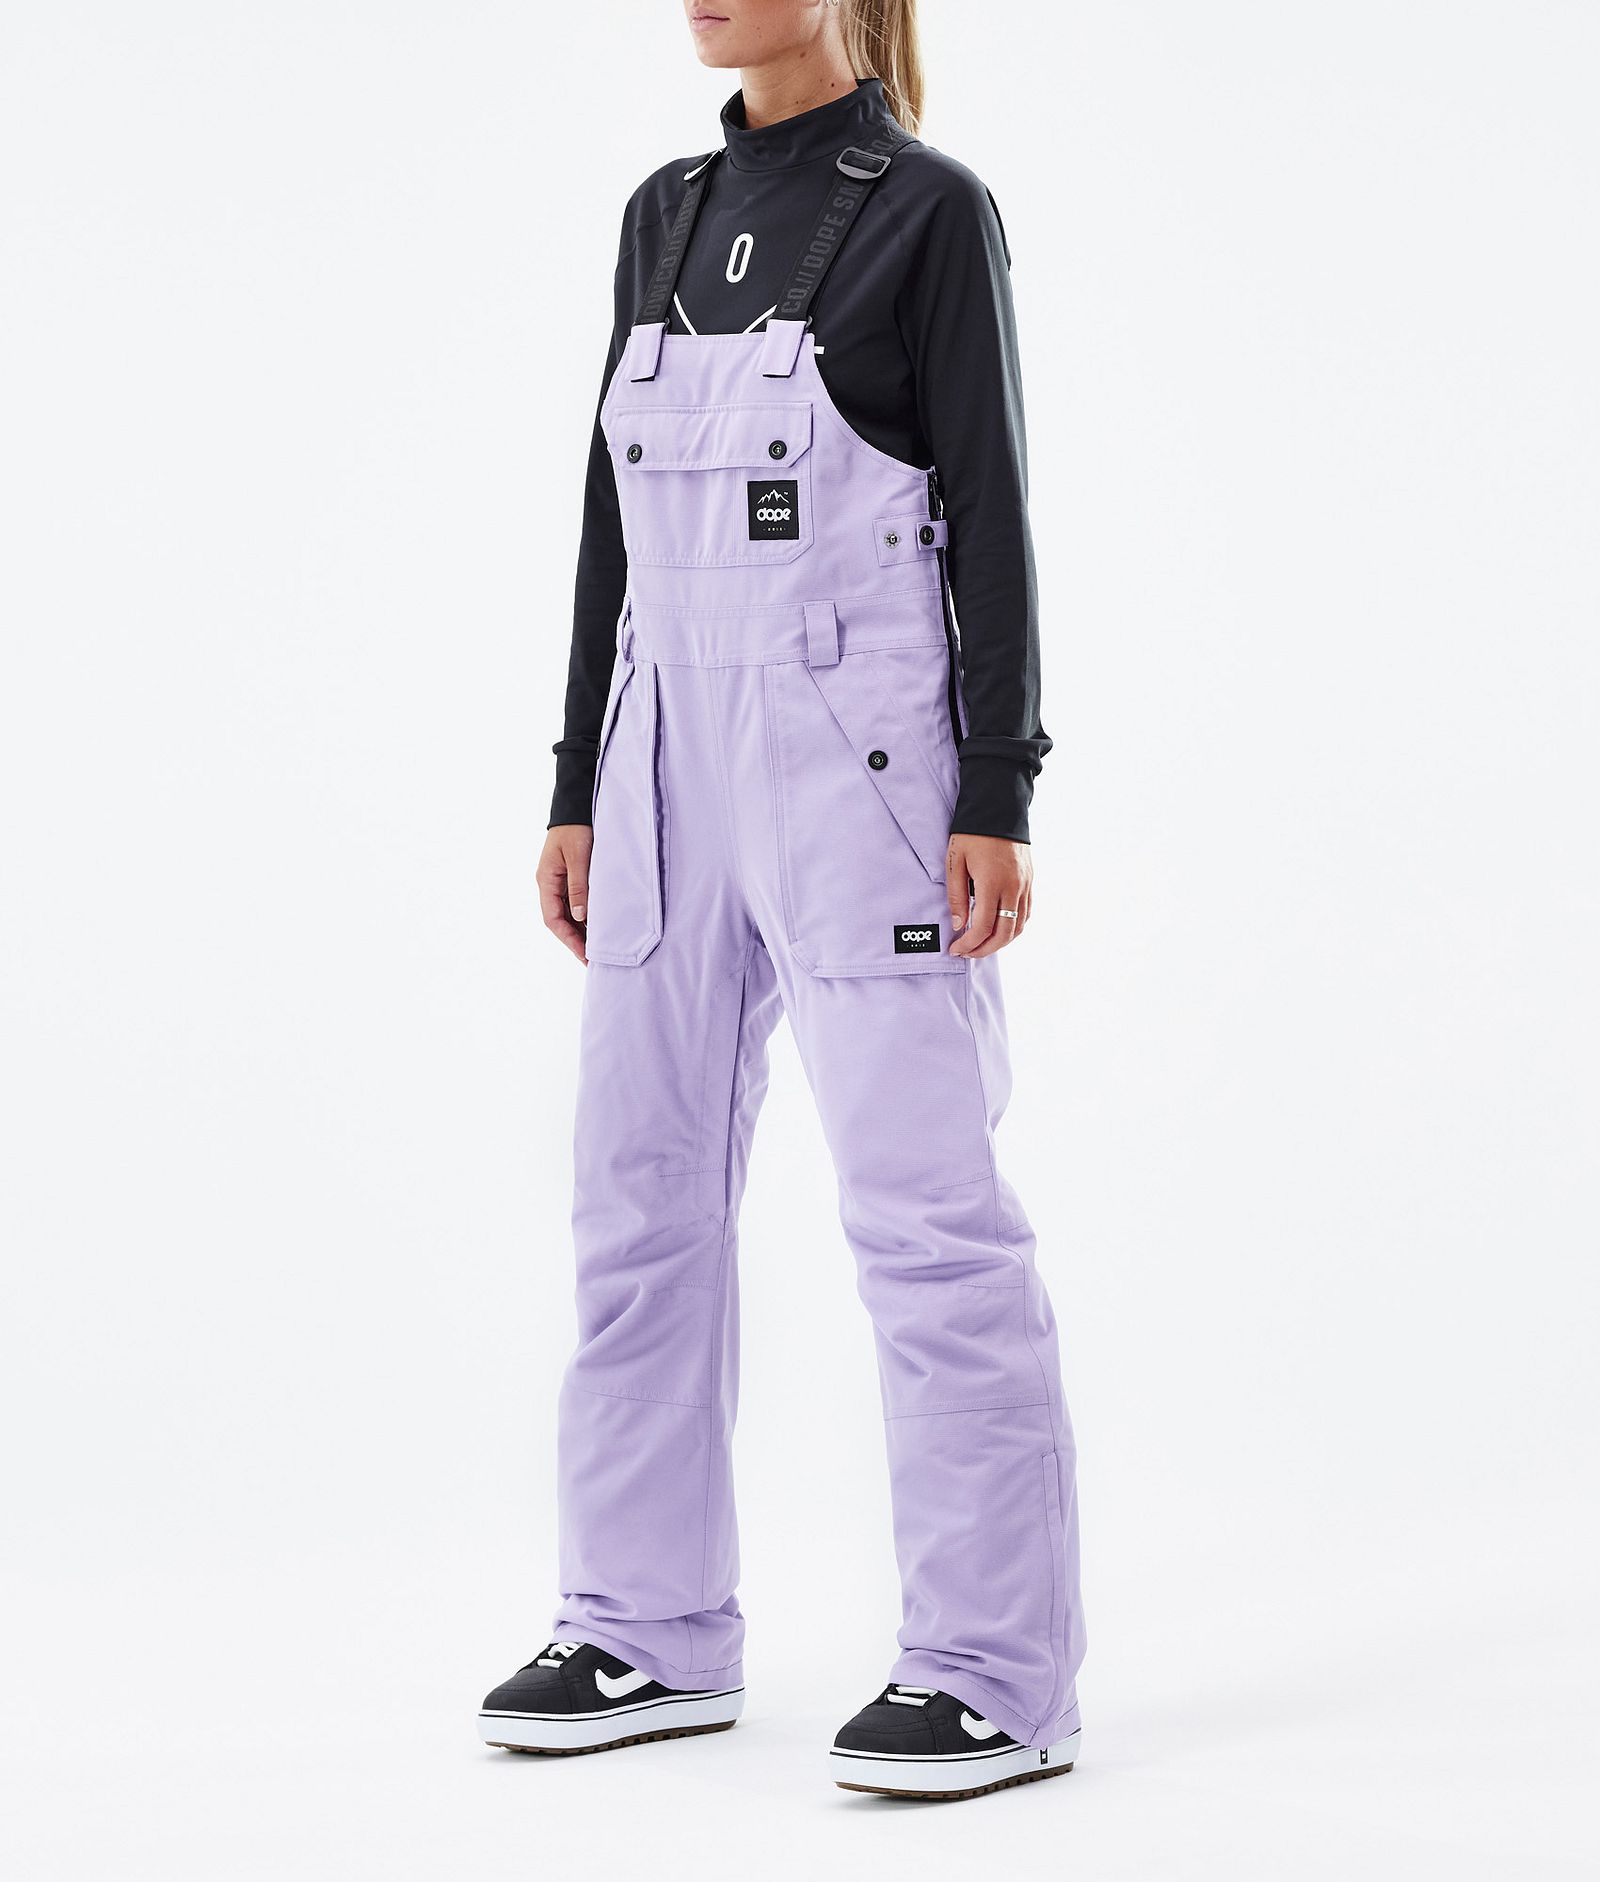 Notorious B.I.B W 2022 Snowboard Pants Women Faded Violet, Image 1 of 6